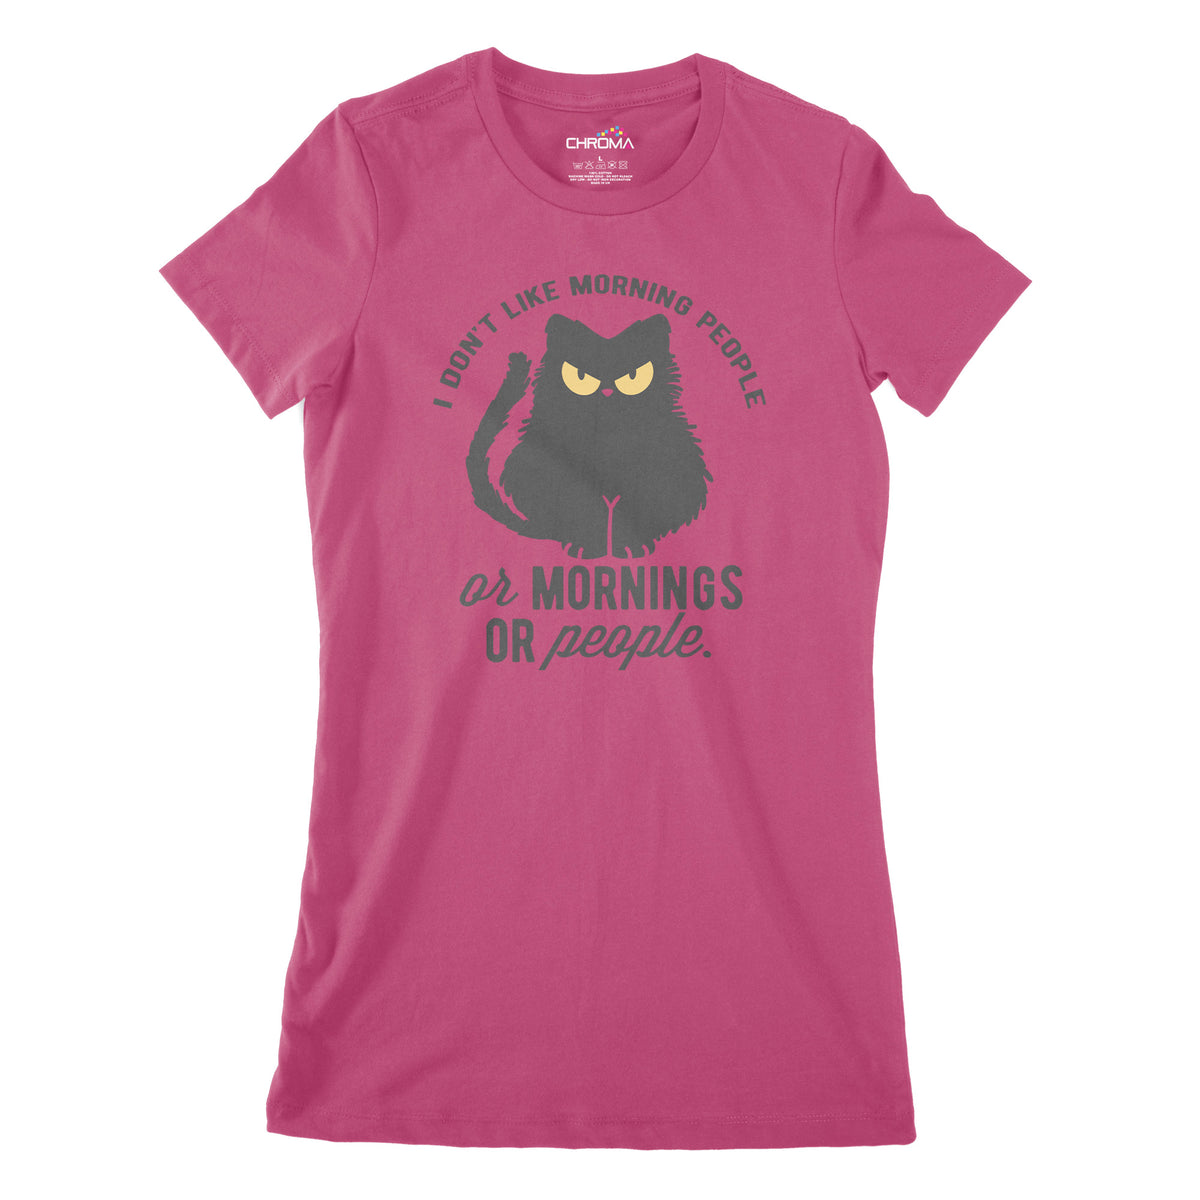 I Don't Like Morning People | Women's Classic Fitted T-Shirt Chroma Clothing